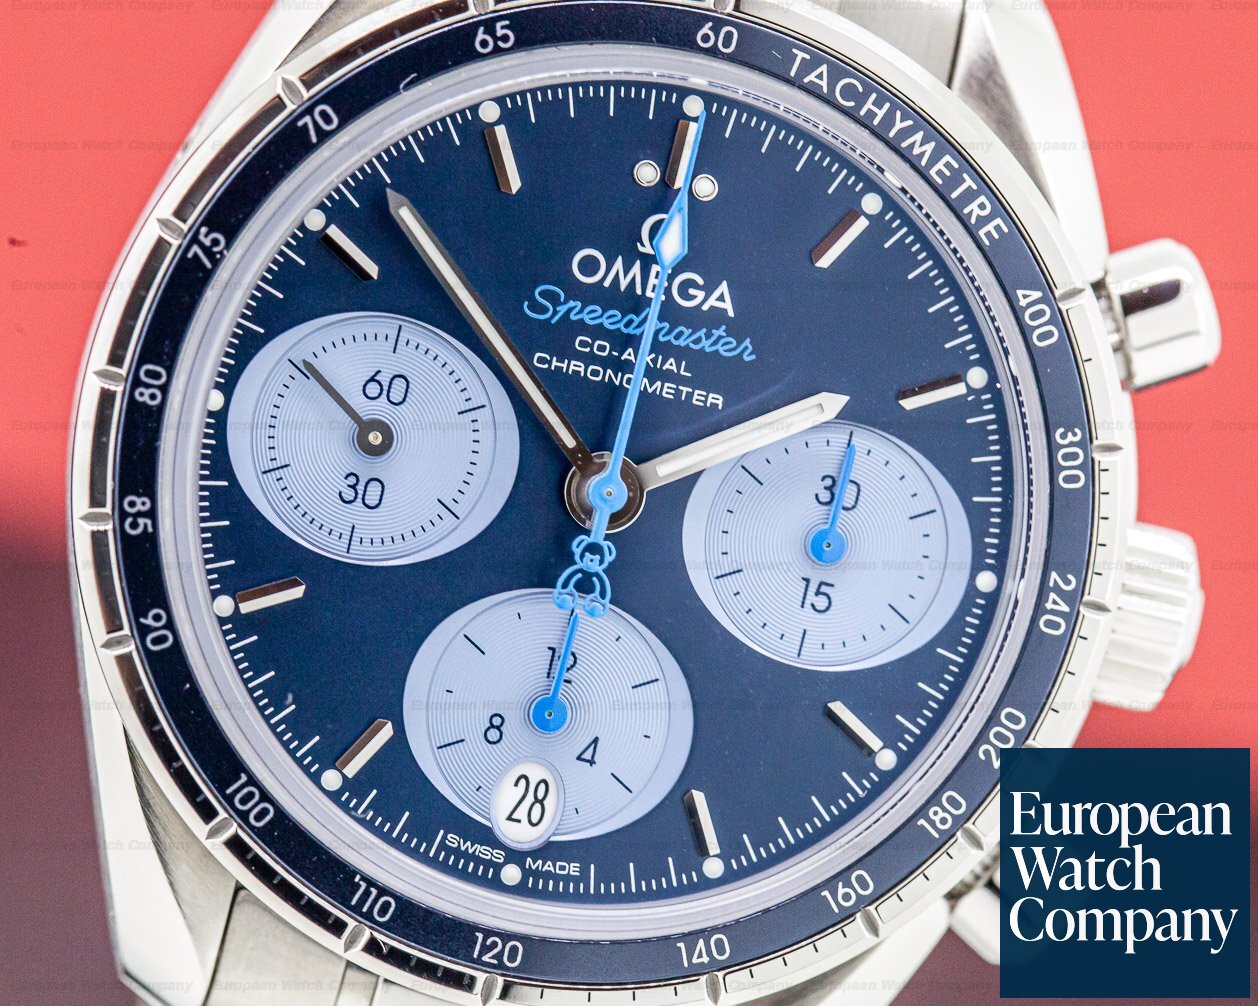 Omega Speedmaster 38mm Orbis Co-Axial Chronograph Ref. 324.30.38.50.03.002